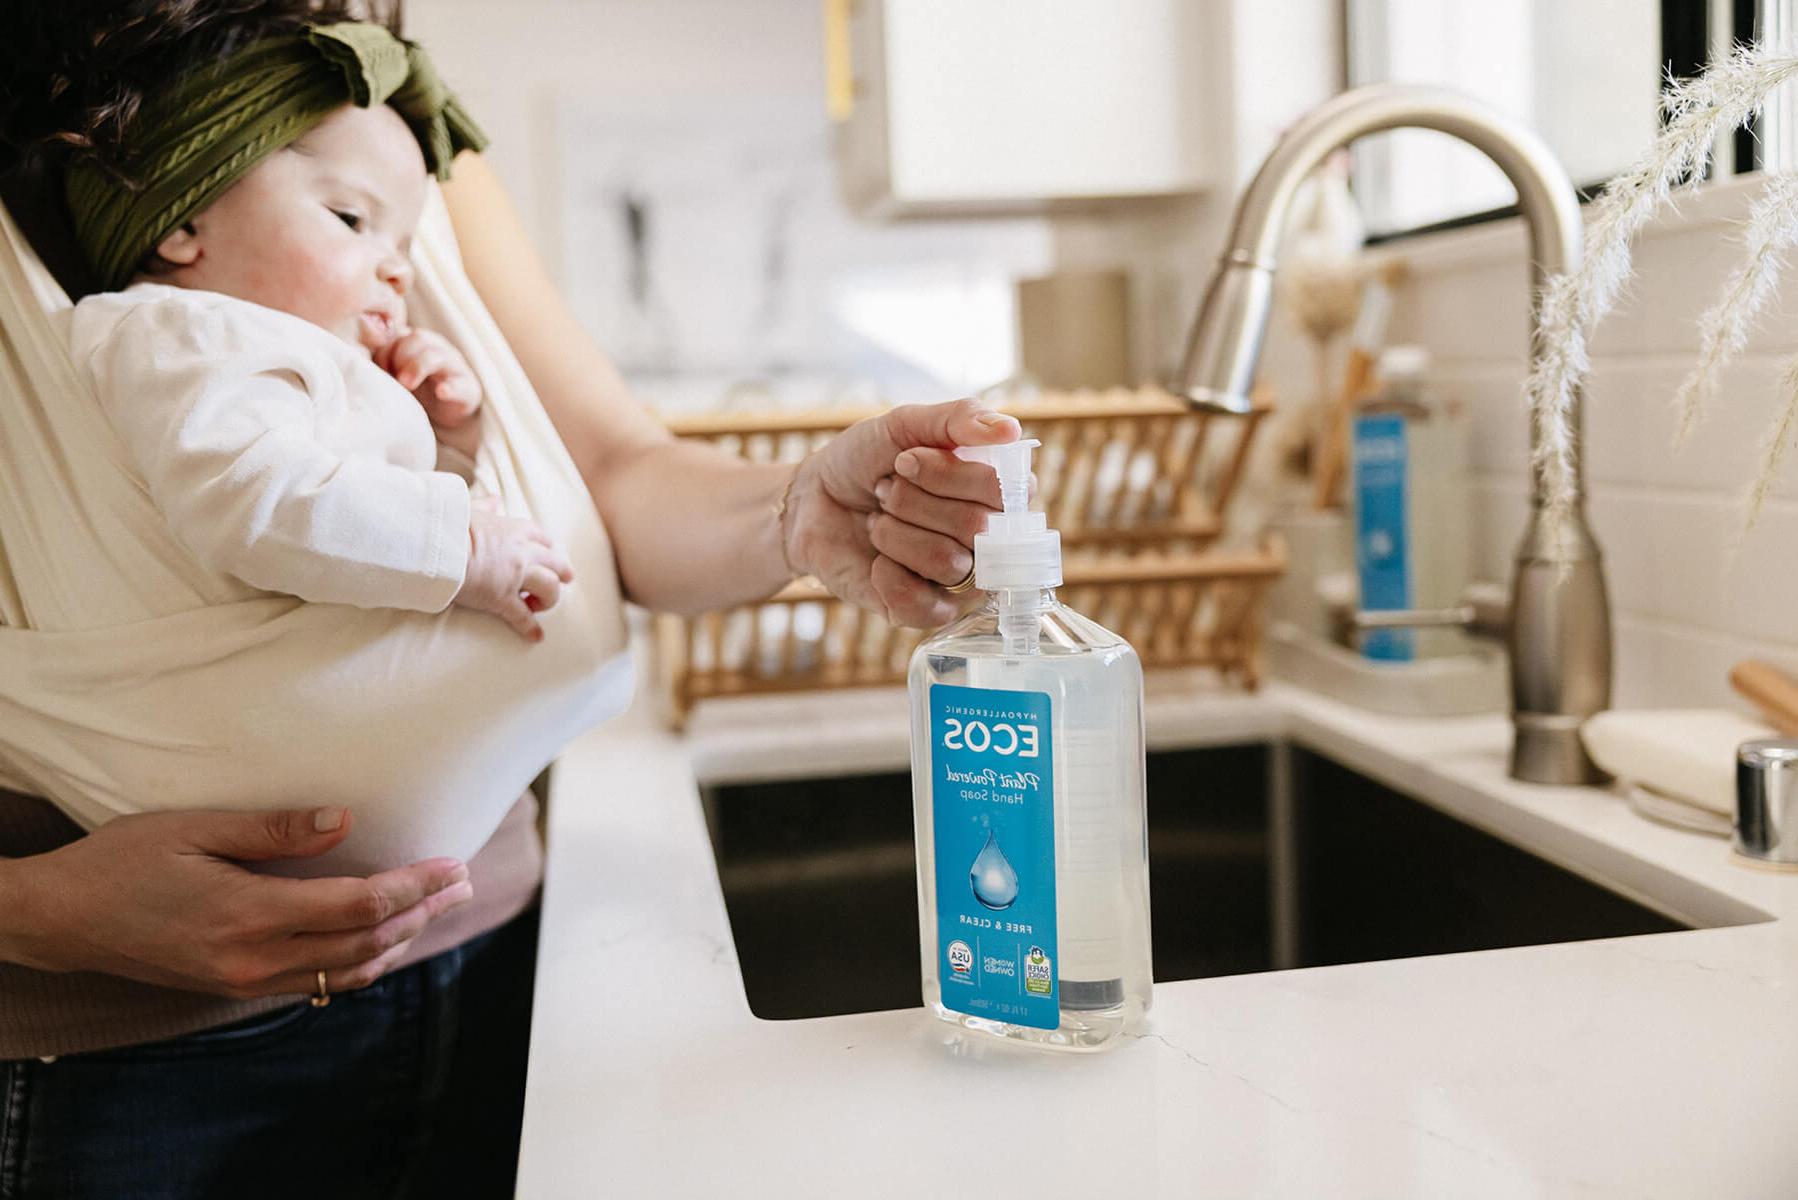 Woman holding baby using ECOS hand soap